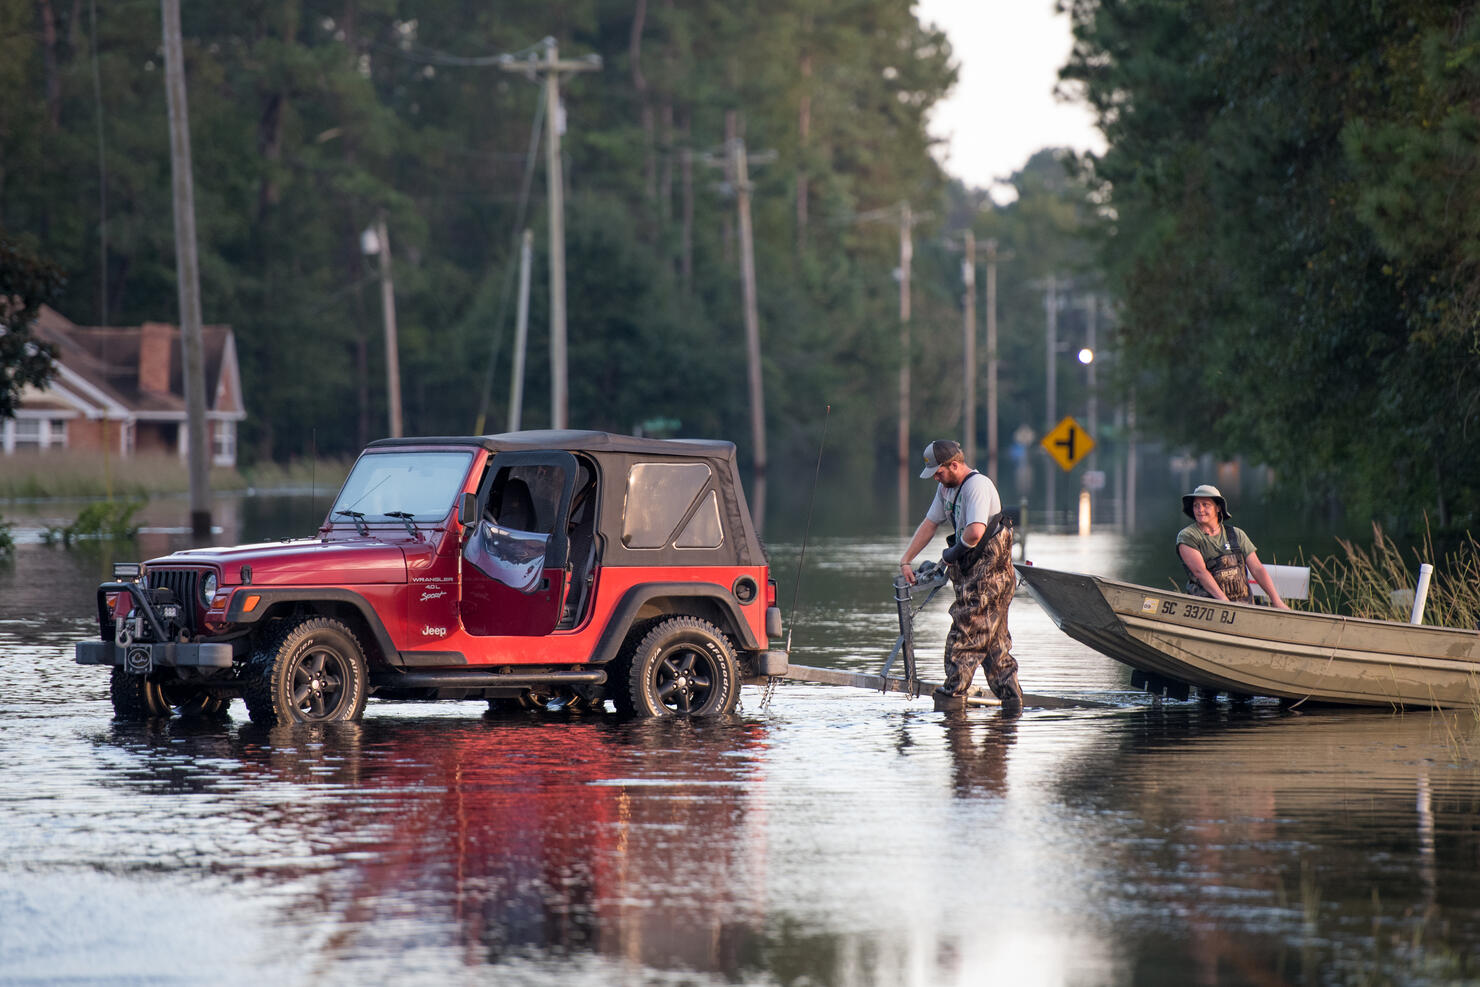 Hurricane florence one of the top ten stories people searched for this year